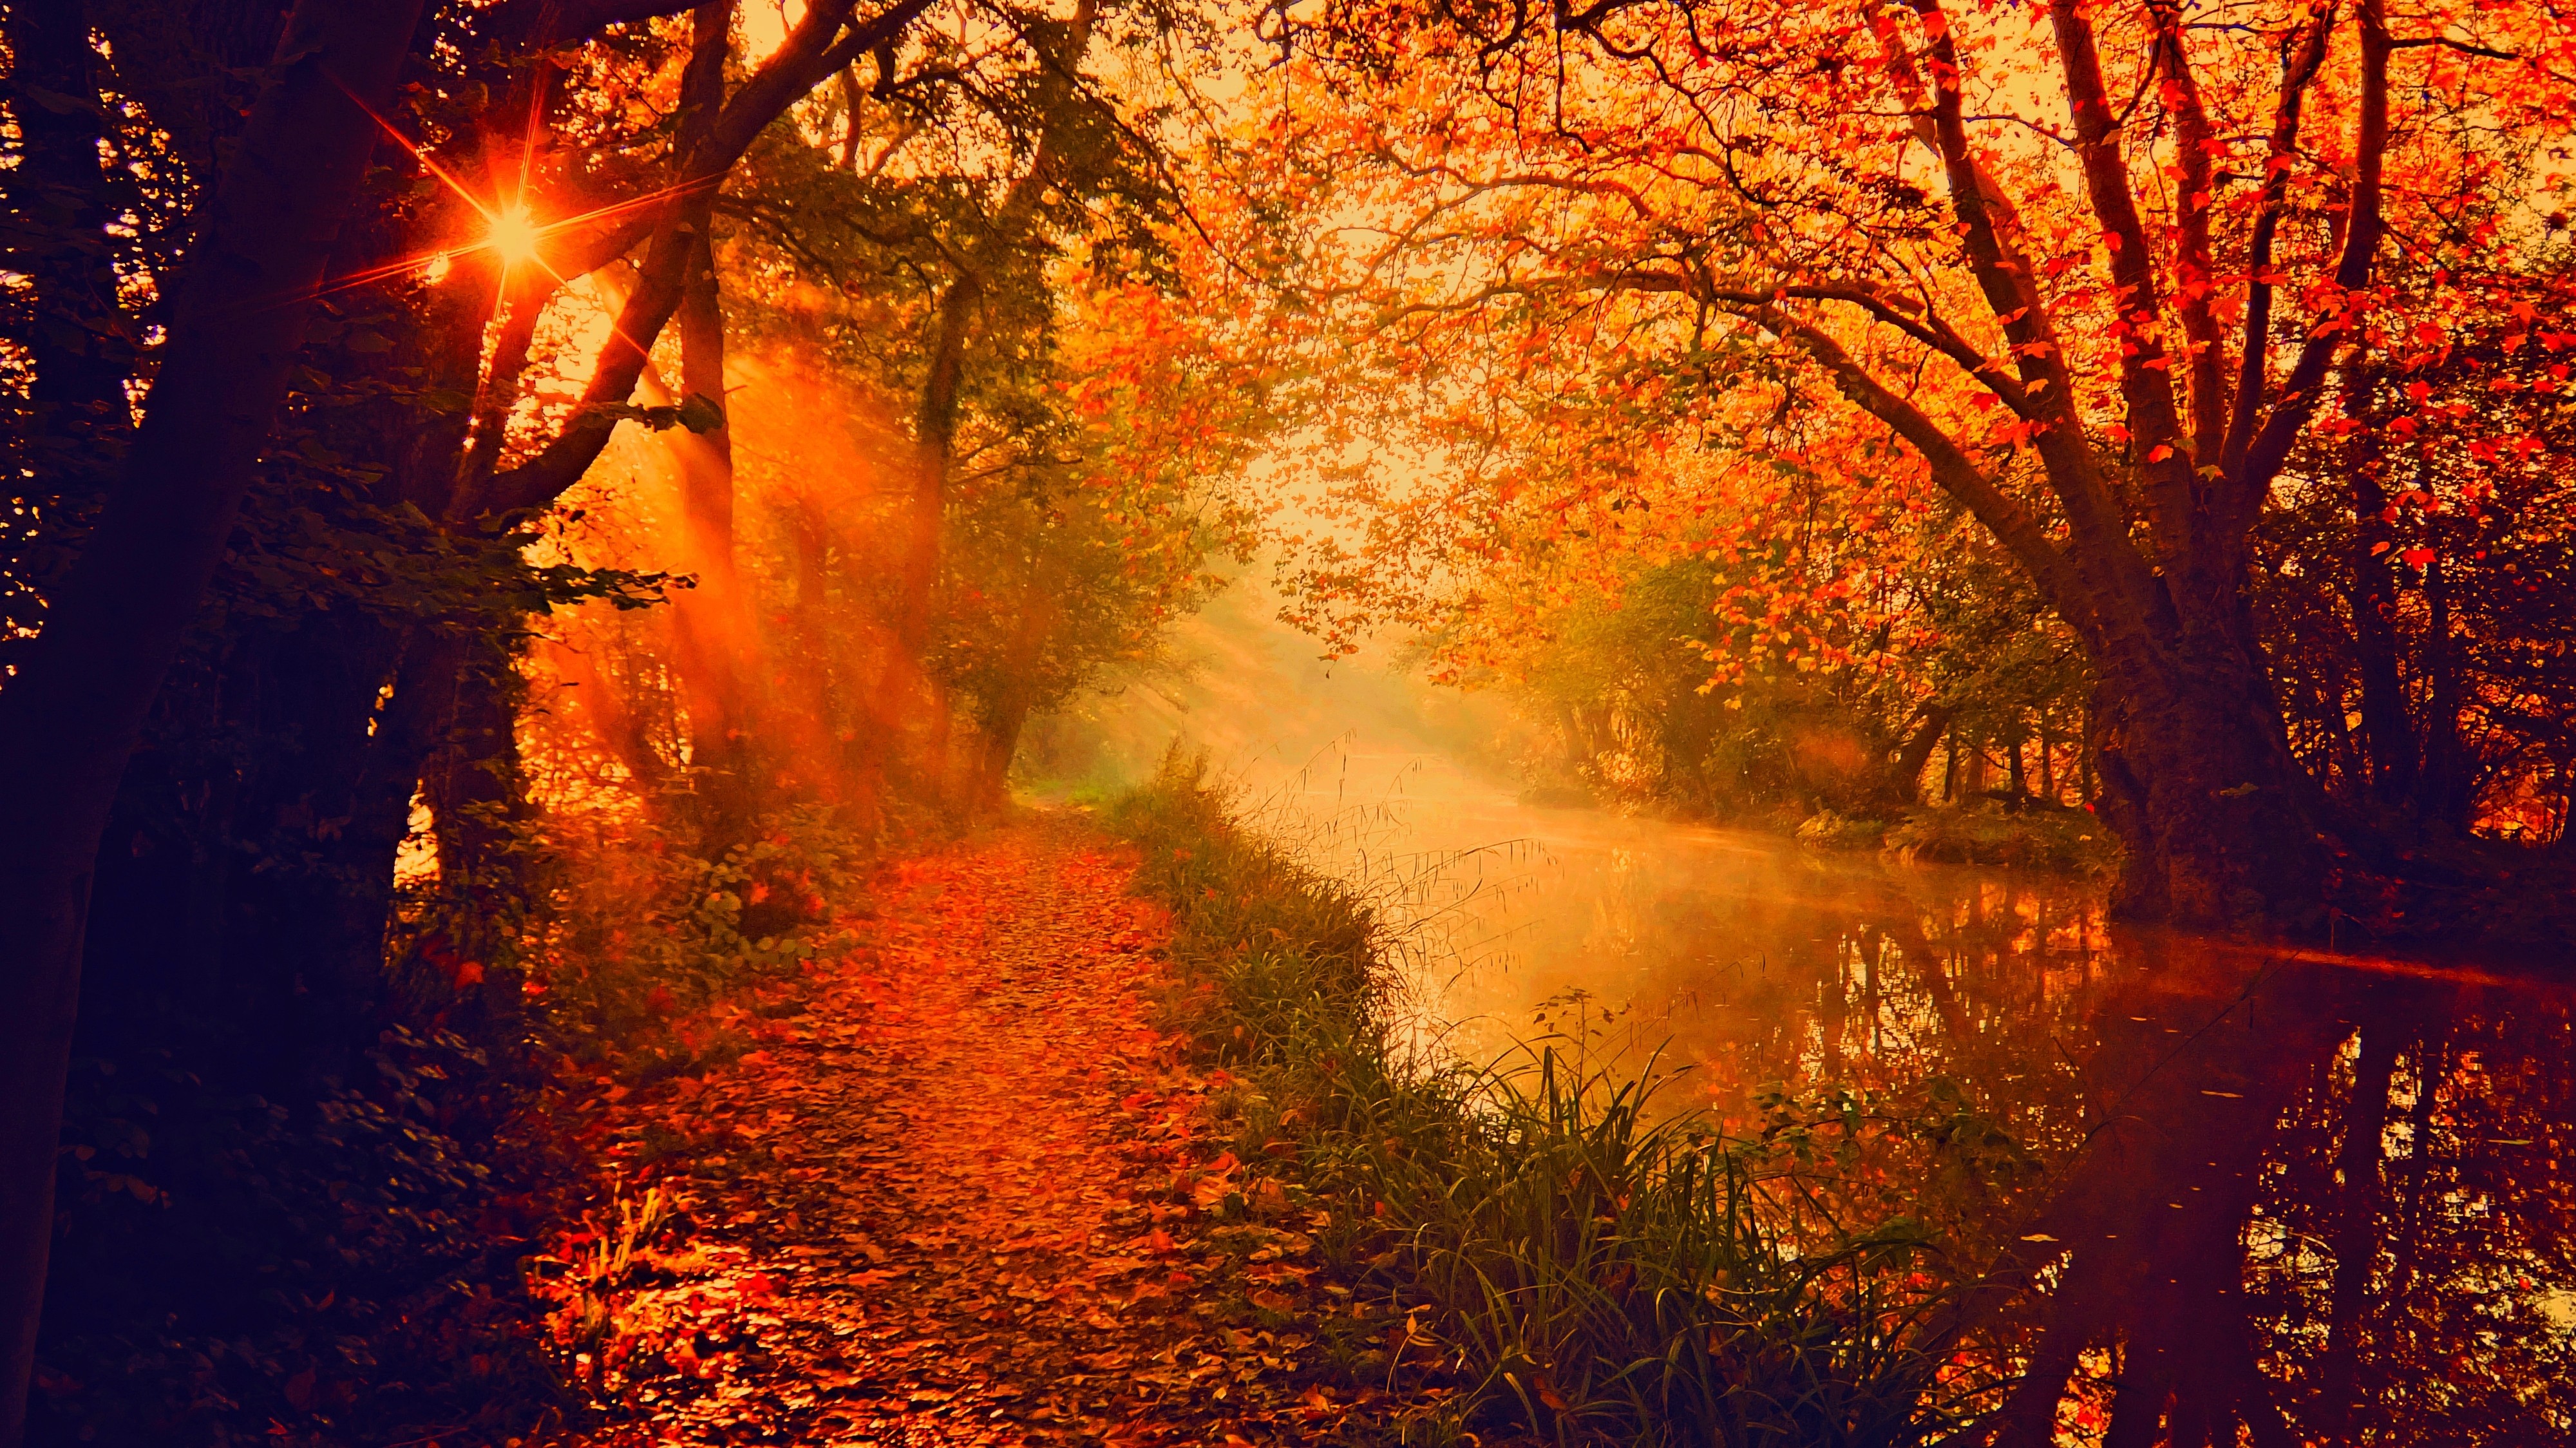 General 4000x2248 trees river sun rays fall nature sunlight fallen leaves